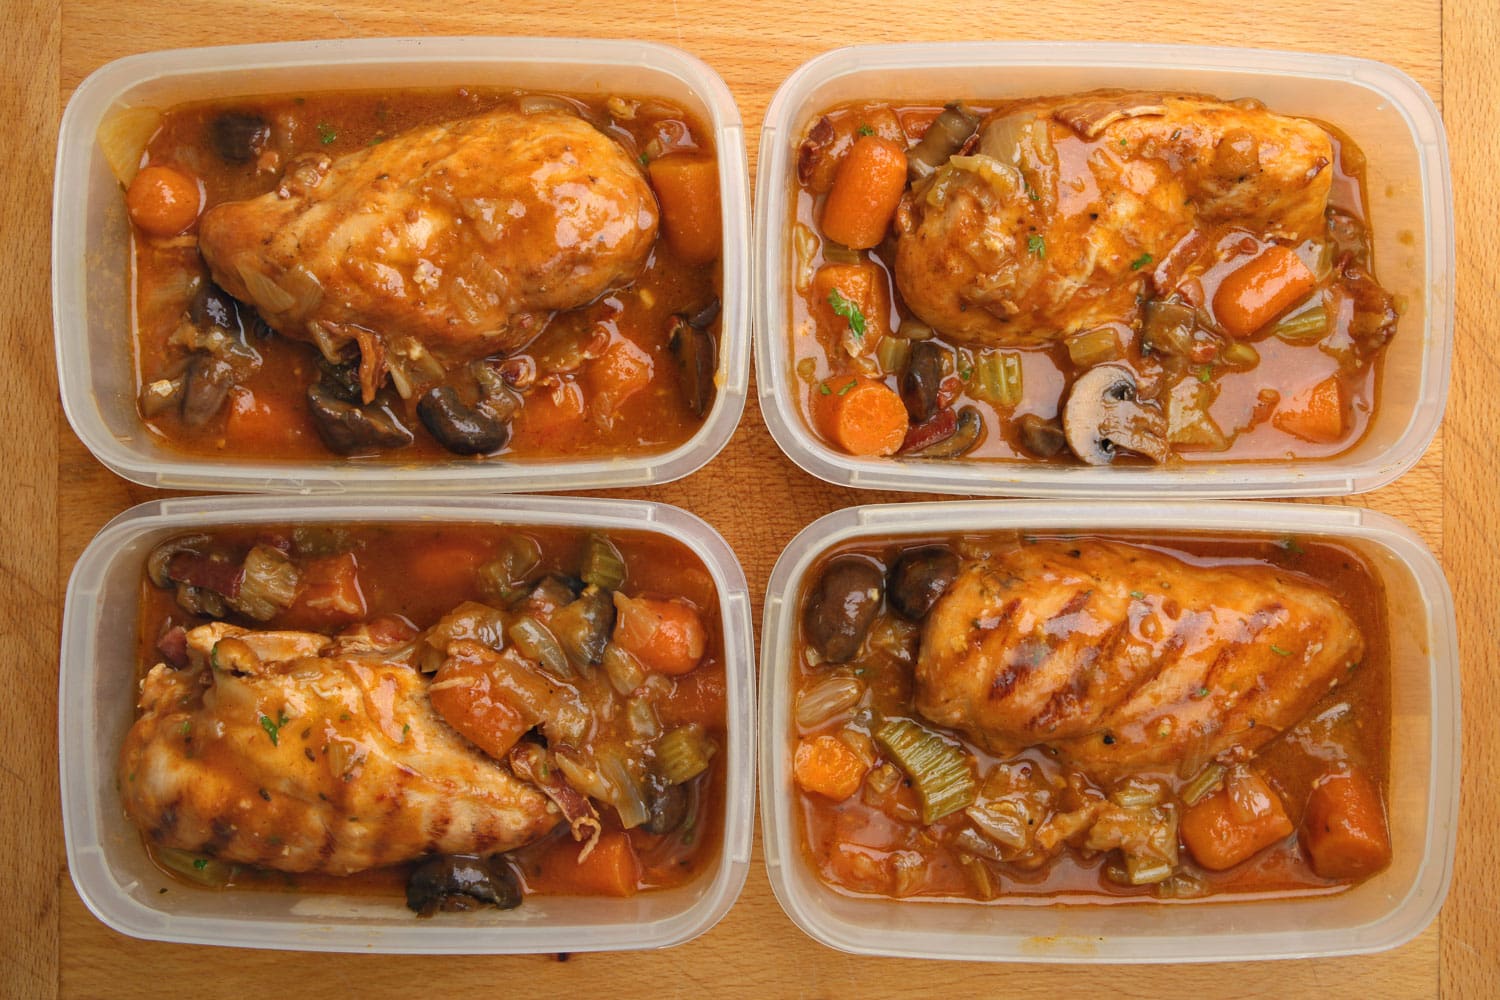 Slow-cooked chicken dinner portions being prepared for freezing or chilling. 